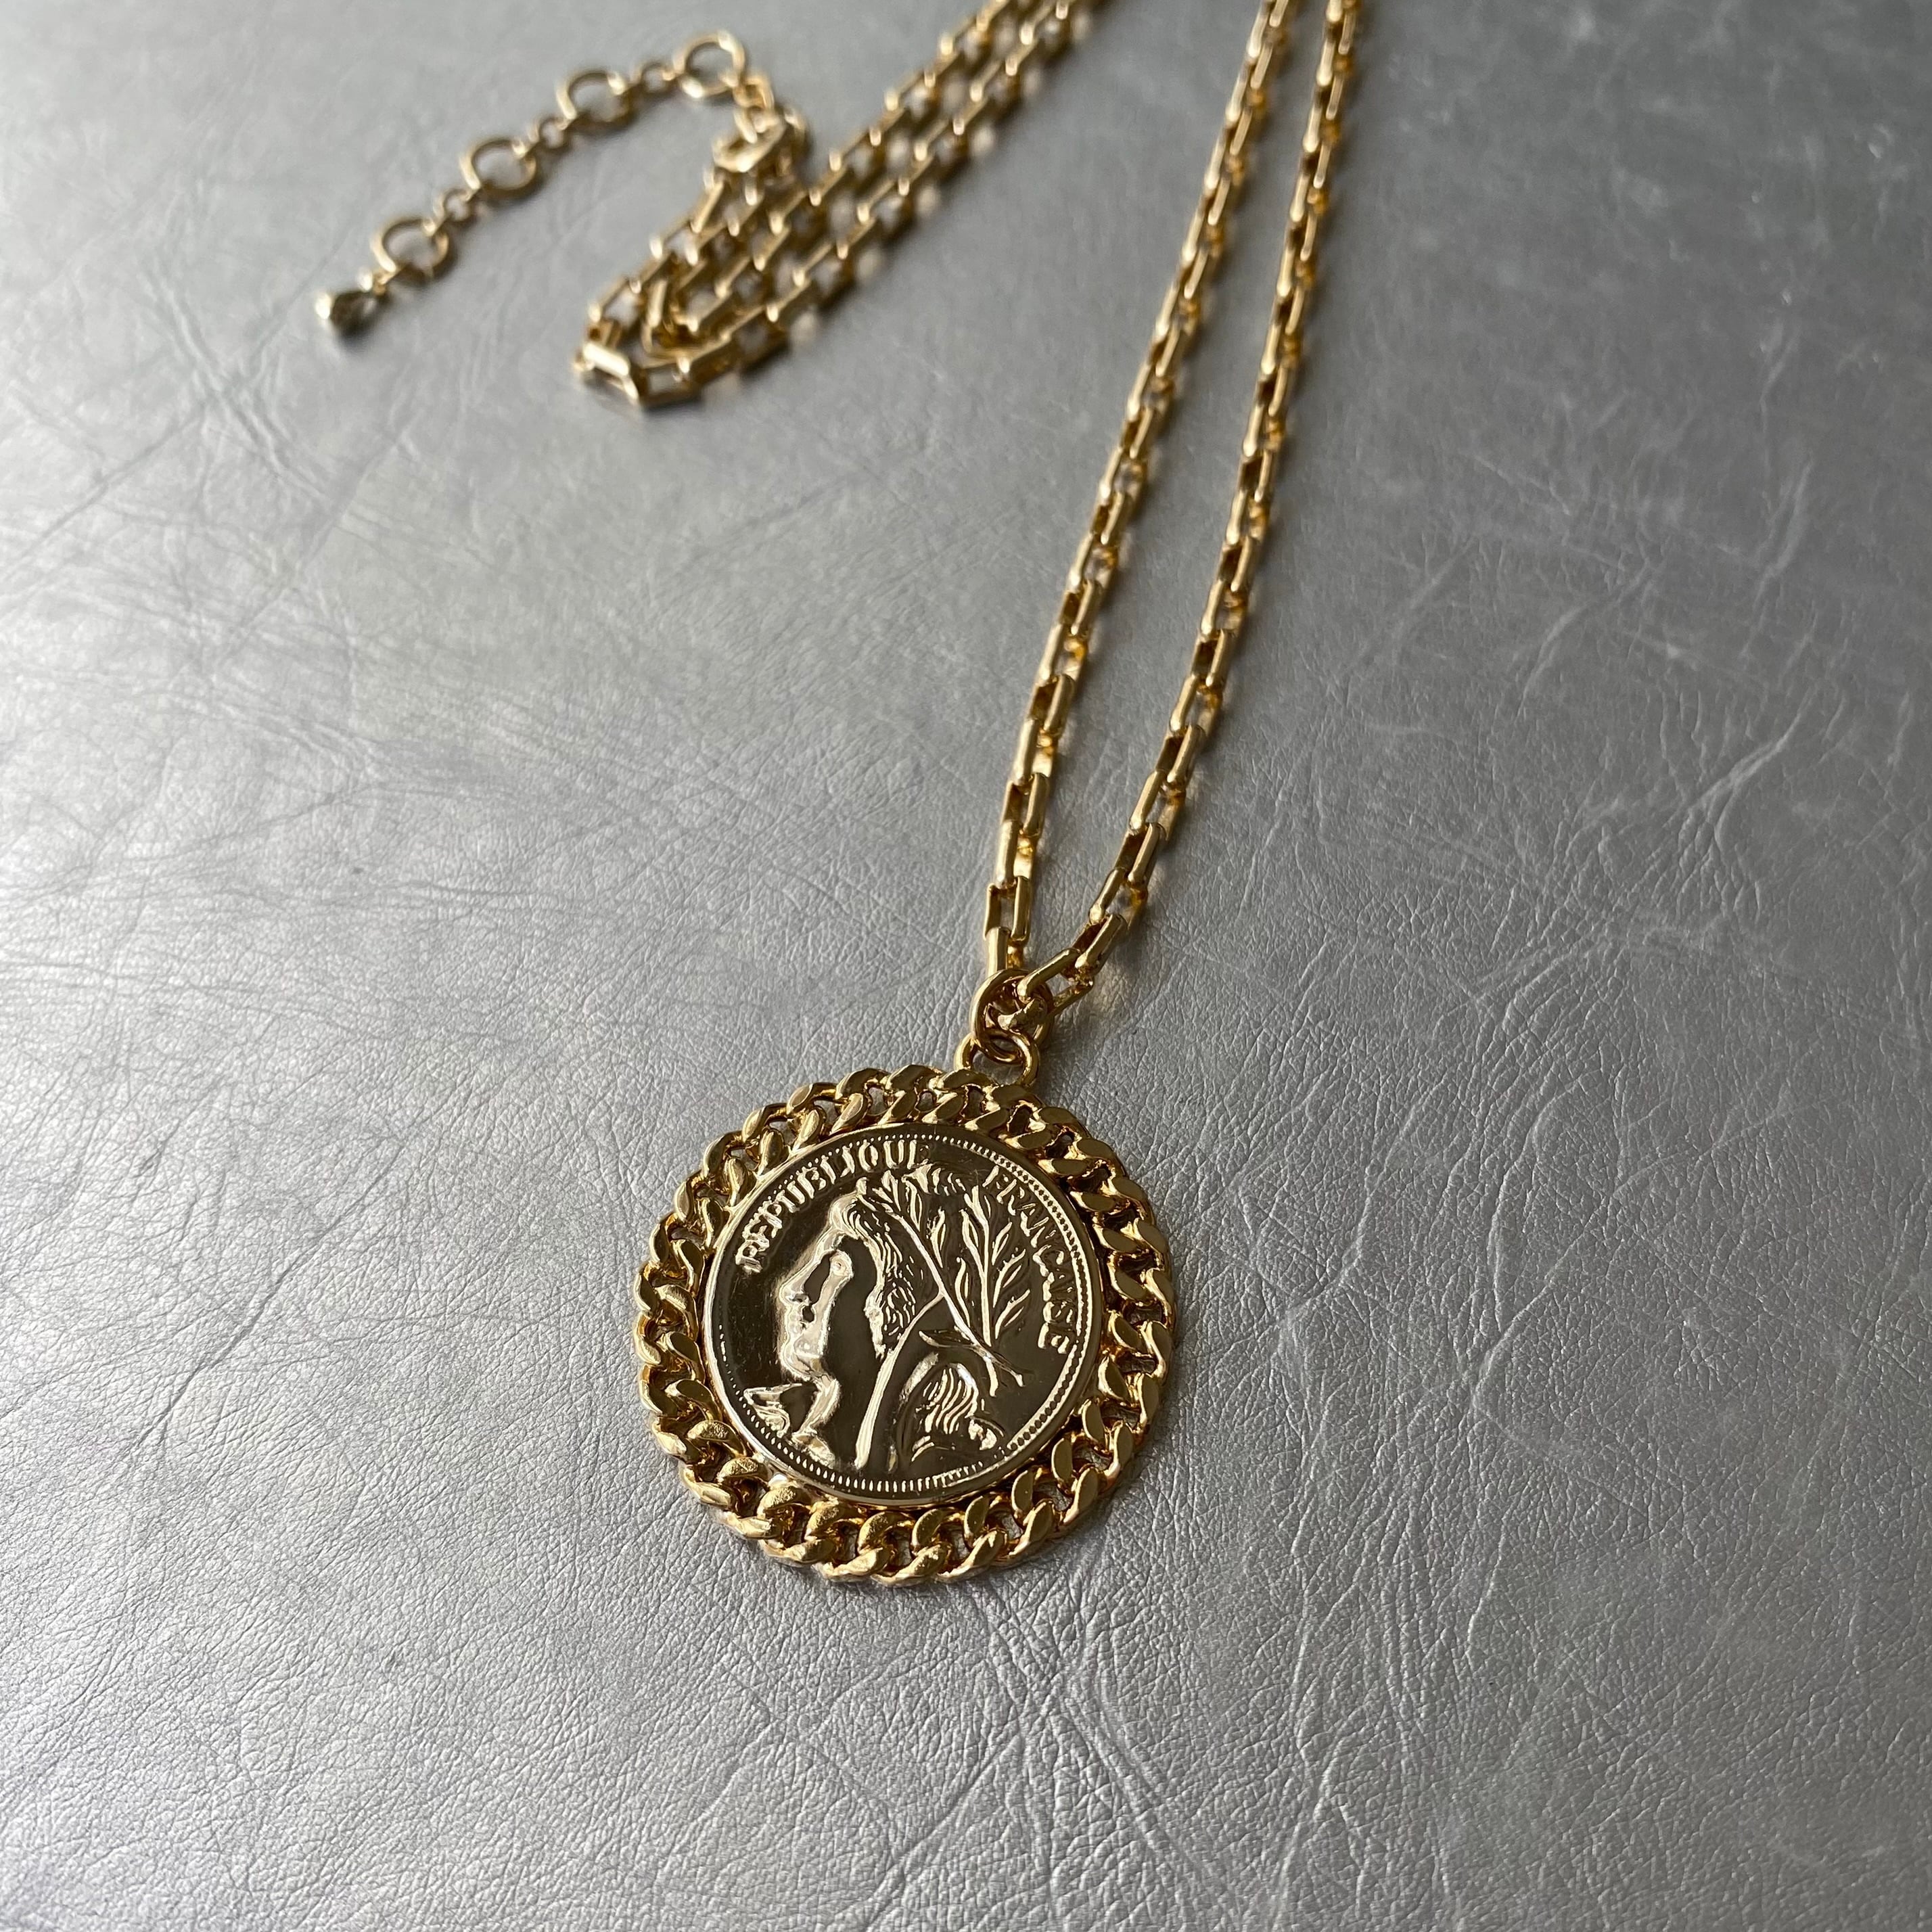 Used retro gold coin necklace レトロ ユーズド ゴールド